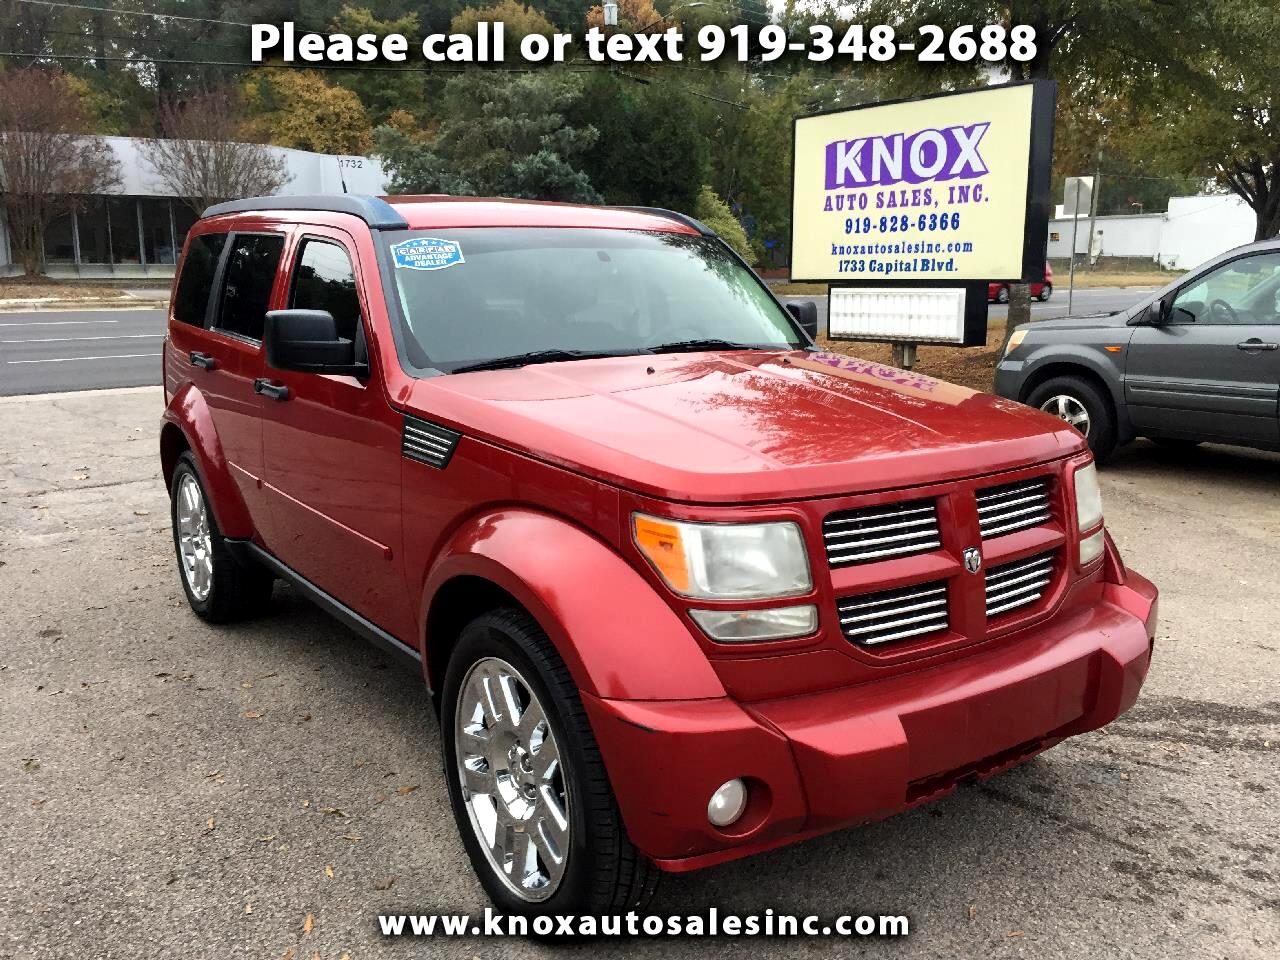 Used 2011 Dodge Nitro Heat 4wd For Sale In Raleigh Nc 27604